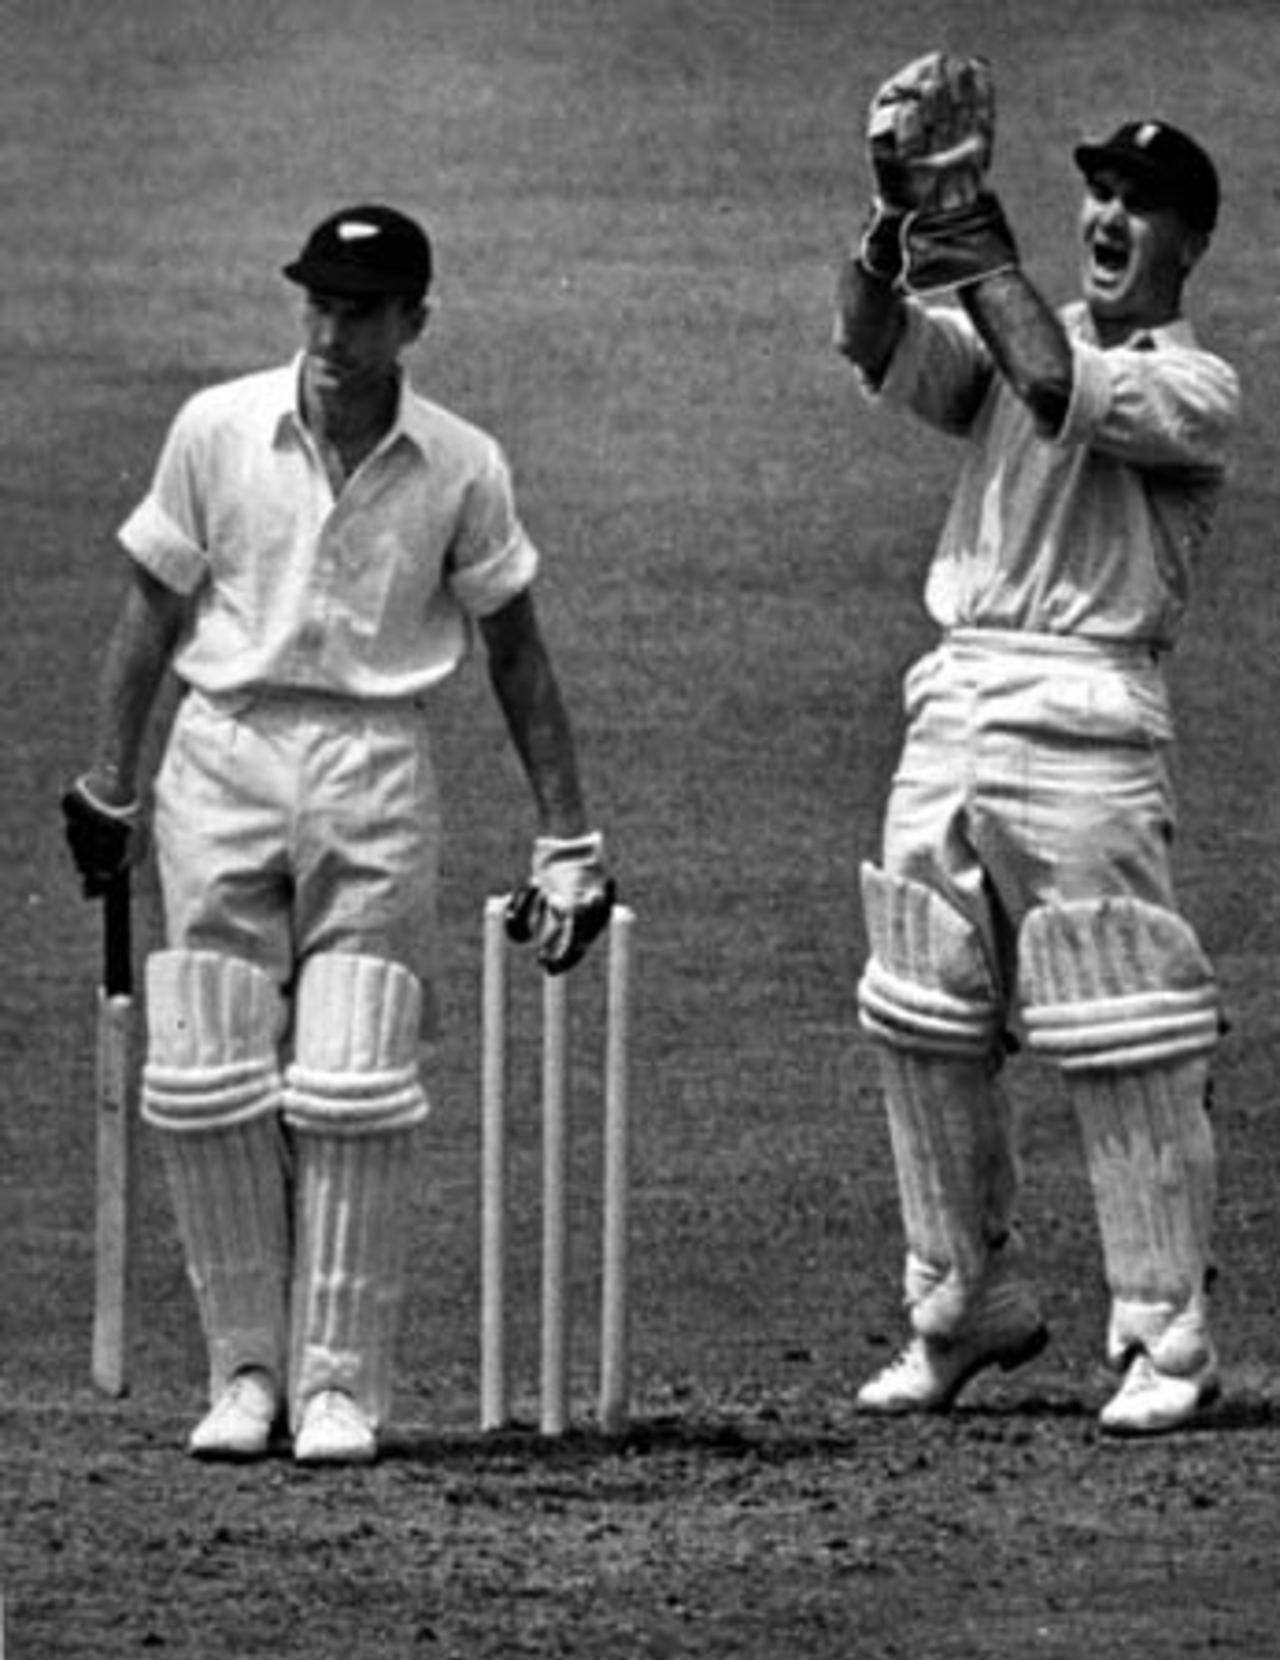 England wicket-keeper Godfrey Evans celebrates catching New Zealand batsman Bert Sutcliffe off the bowling of left arm orthodox spinner Jack Young for 32 in his first innings. 1st Test: England v New Zealand at Headingley, Leeds, 1949.